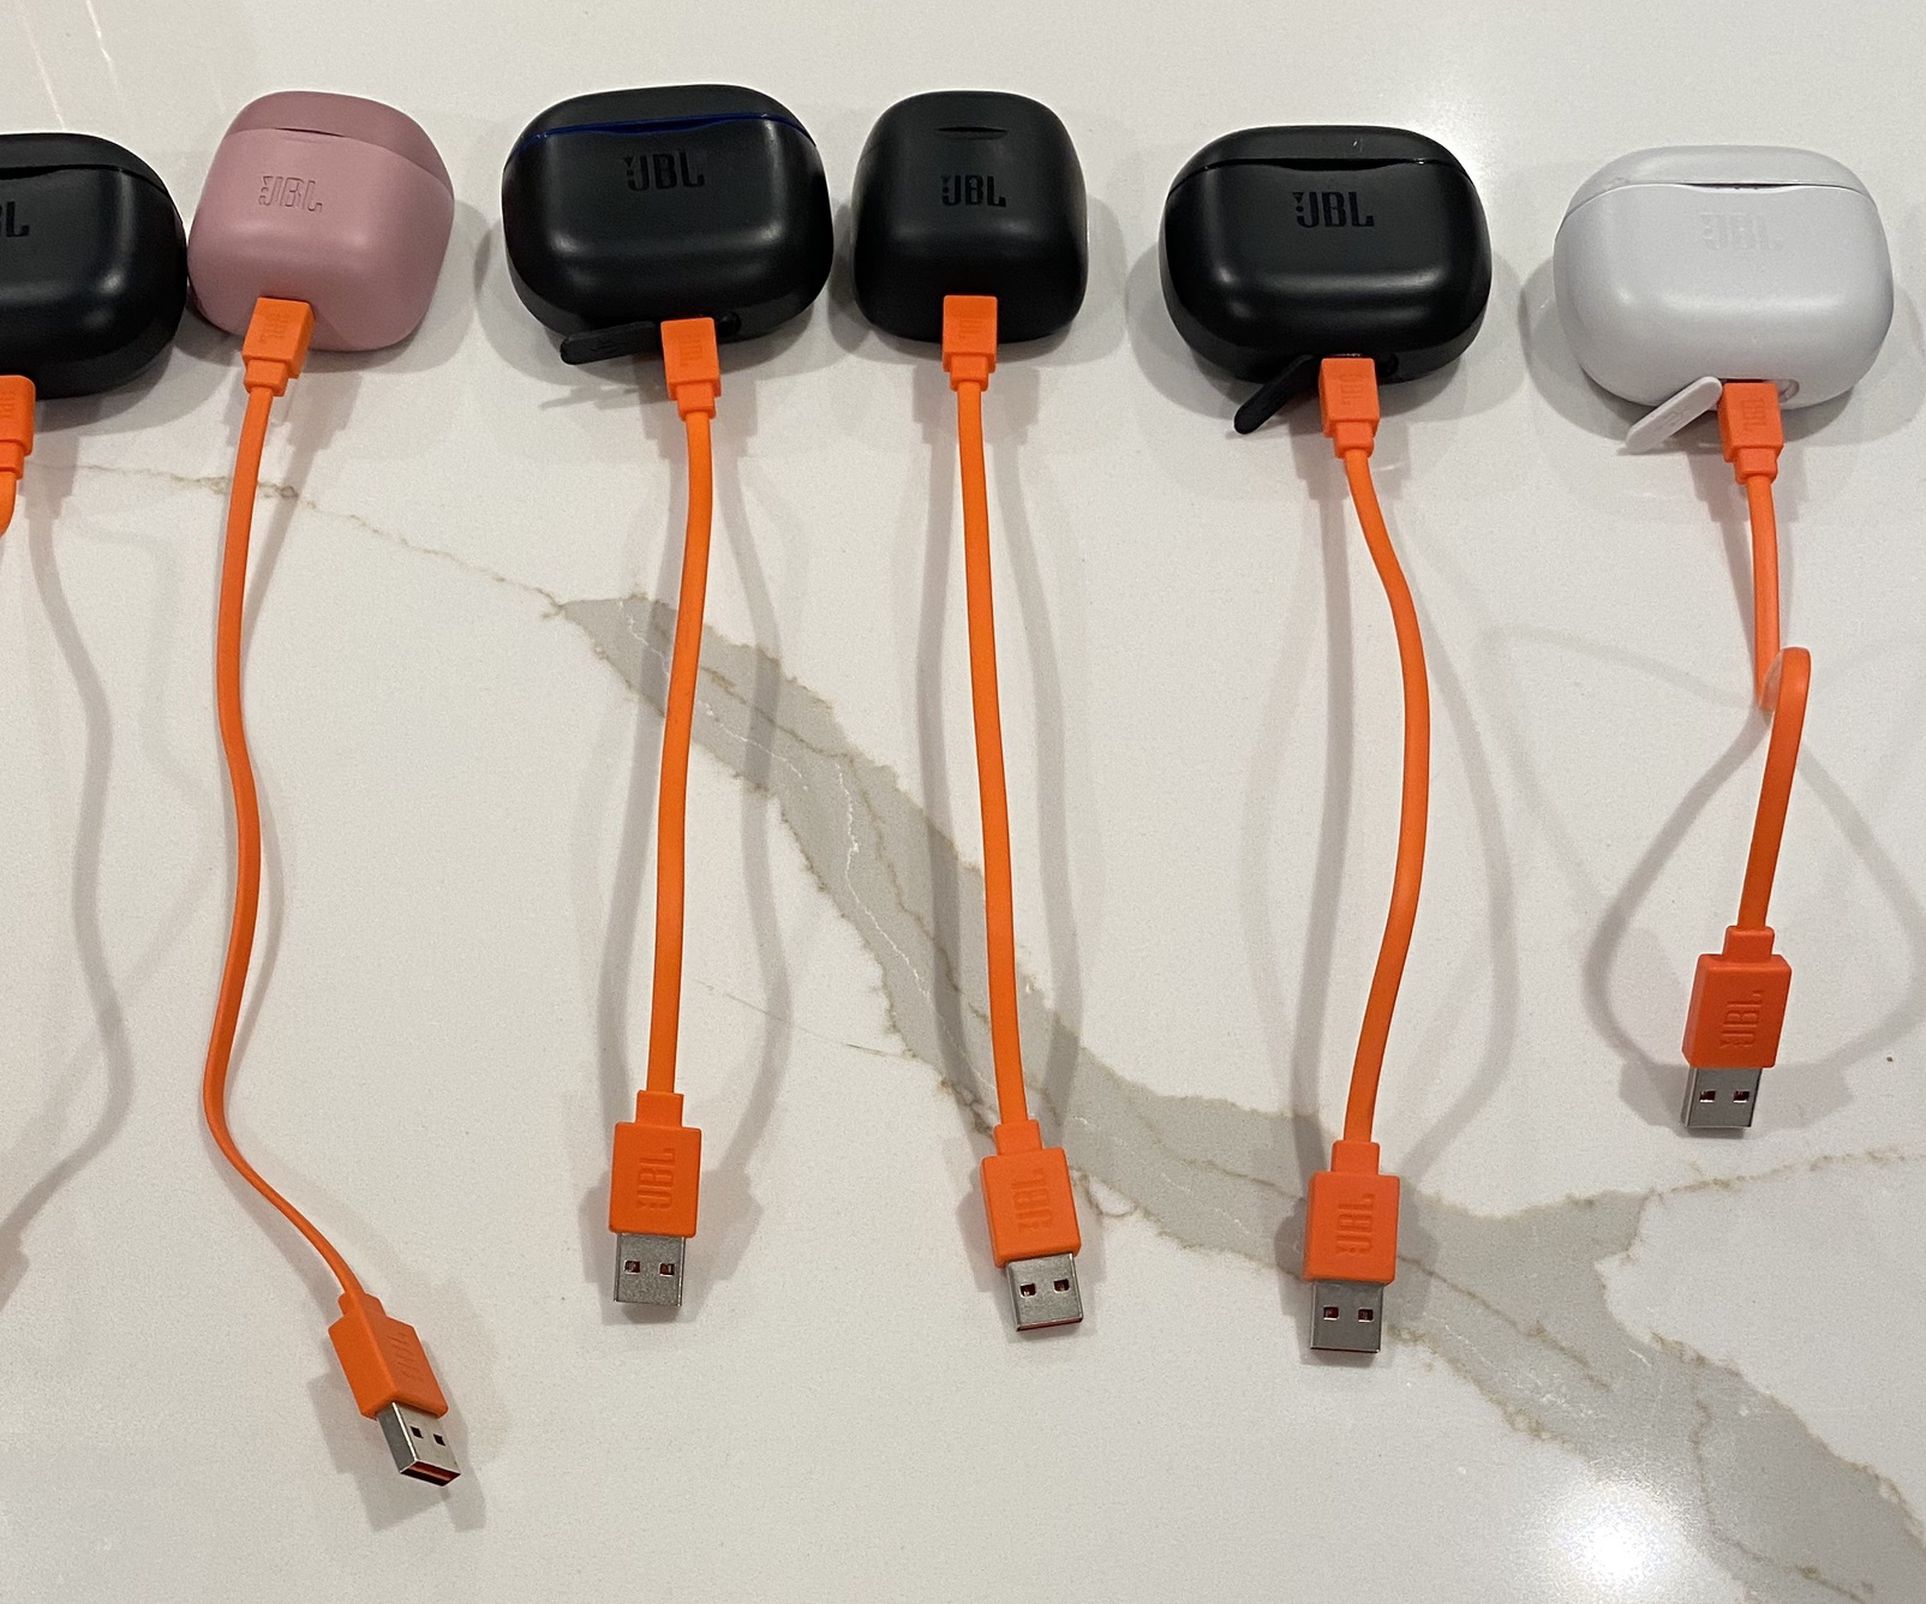 Harman JBL Earbuds (IF ITEM IS NOT MARKED AS SOLD THEN ITS STILL AVAILABLE )